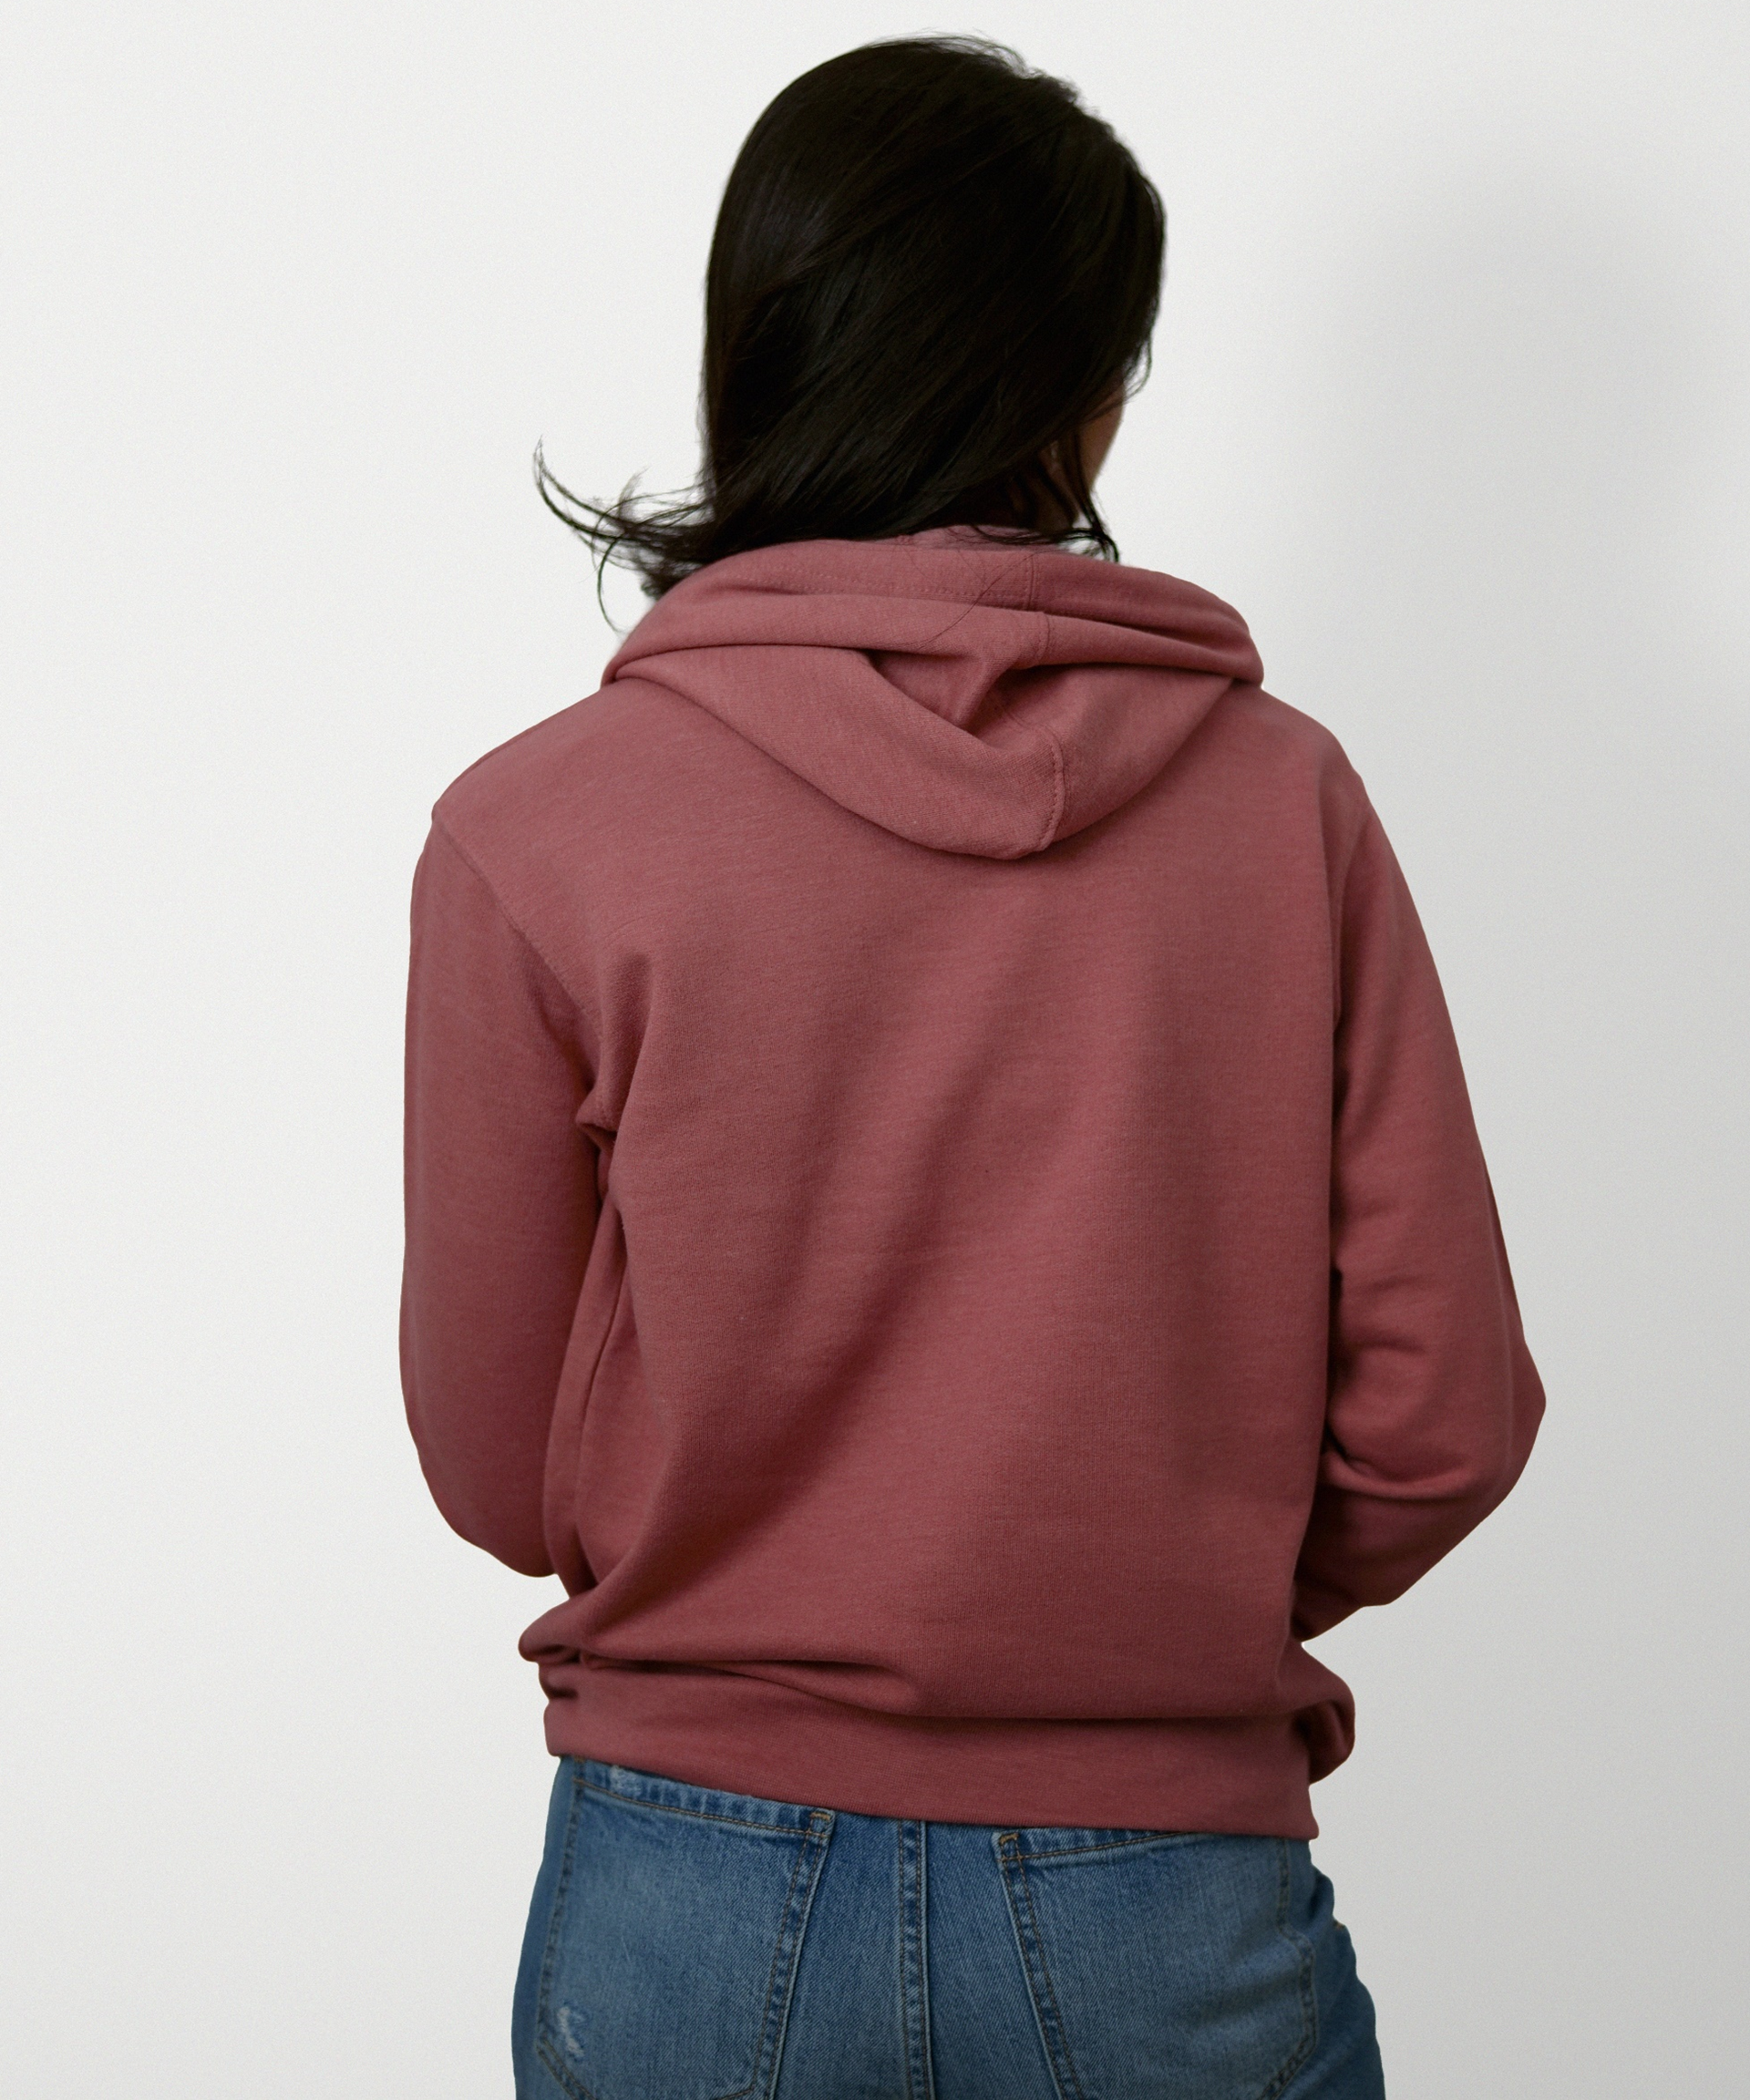 Essential Pullover Hoodie for Women (Dusty Rose)